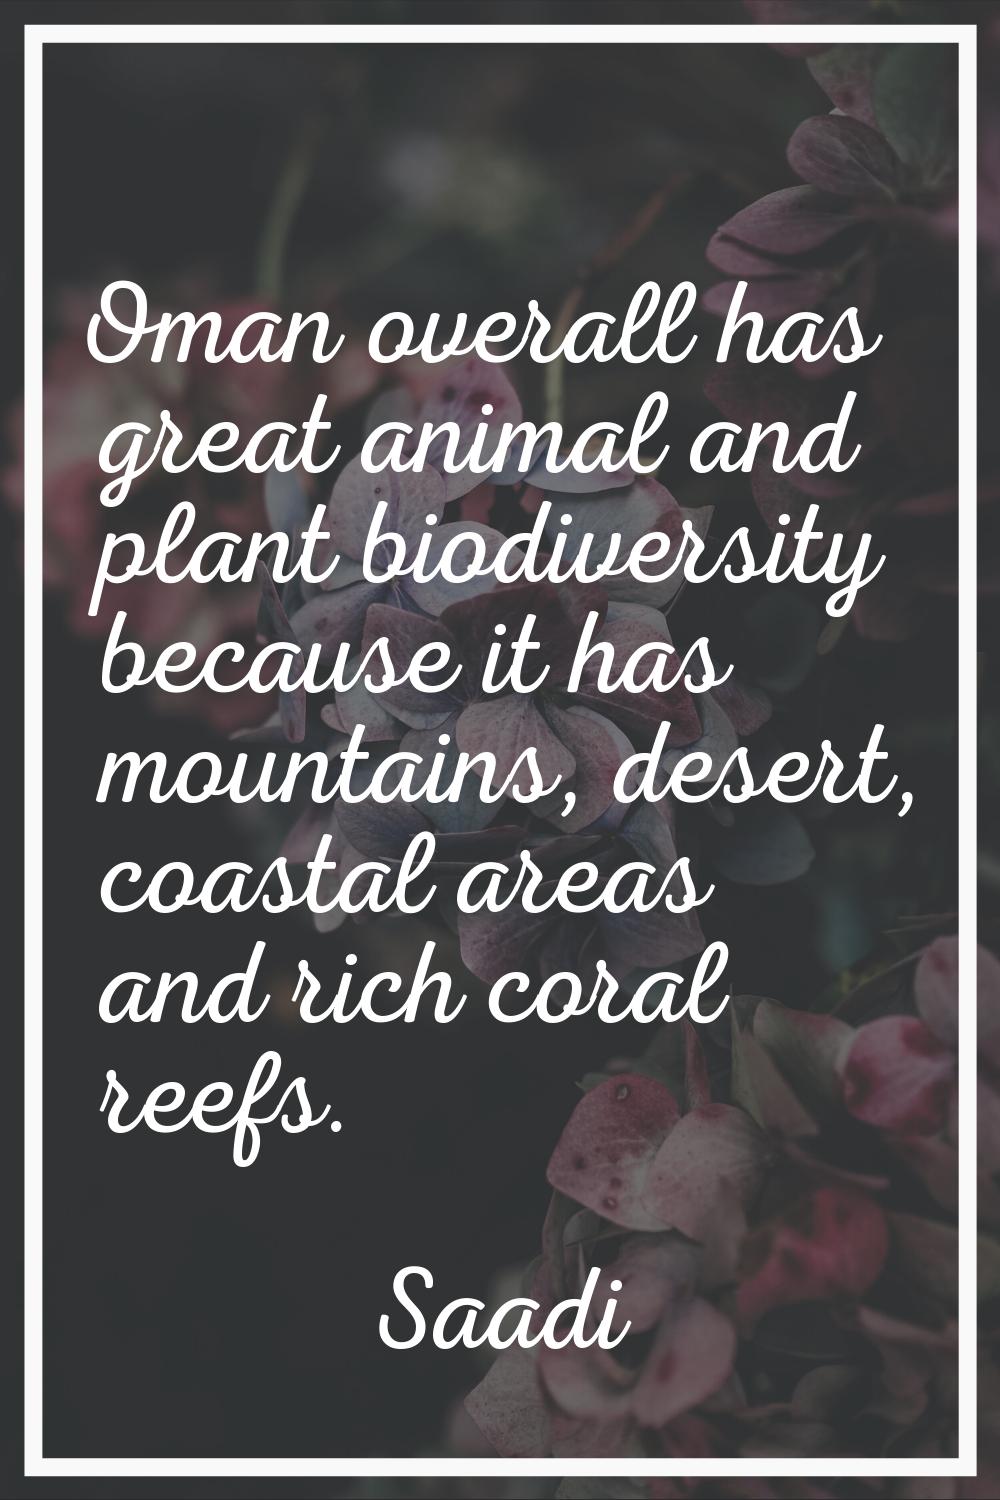 Oman overall has great animal and plant biodiversity because it has mountains, desert, coastal area